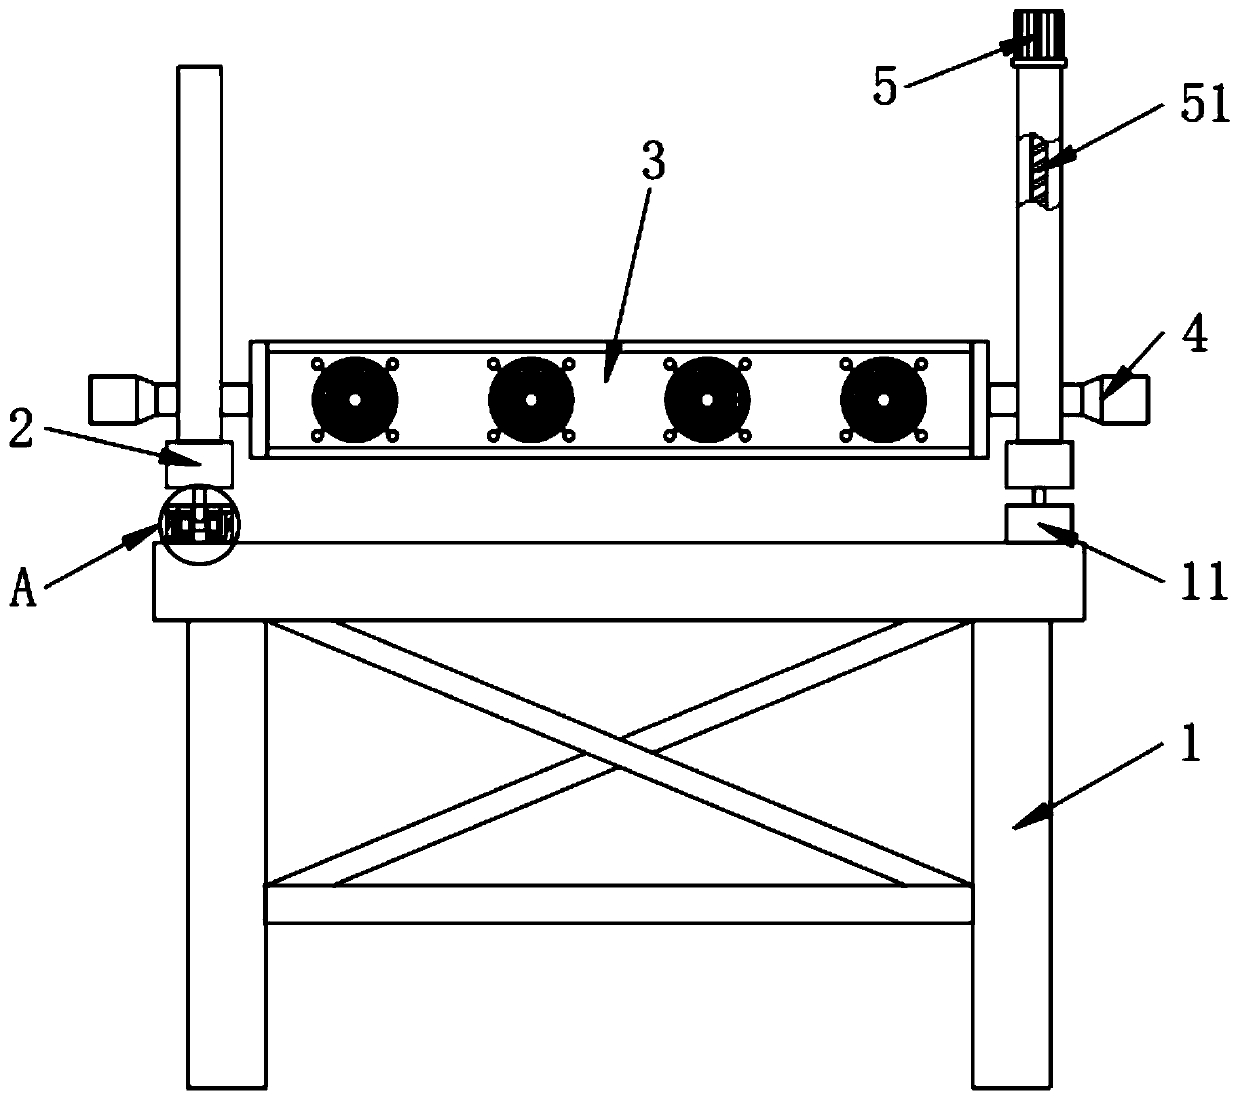 Device for eliminating dust on cut board edge and preventing sparks